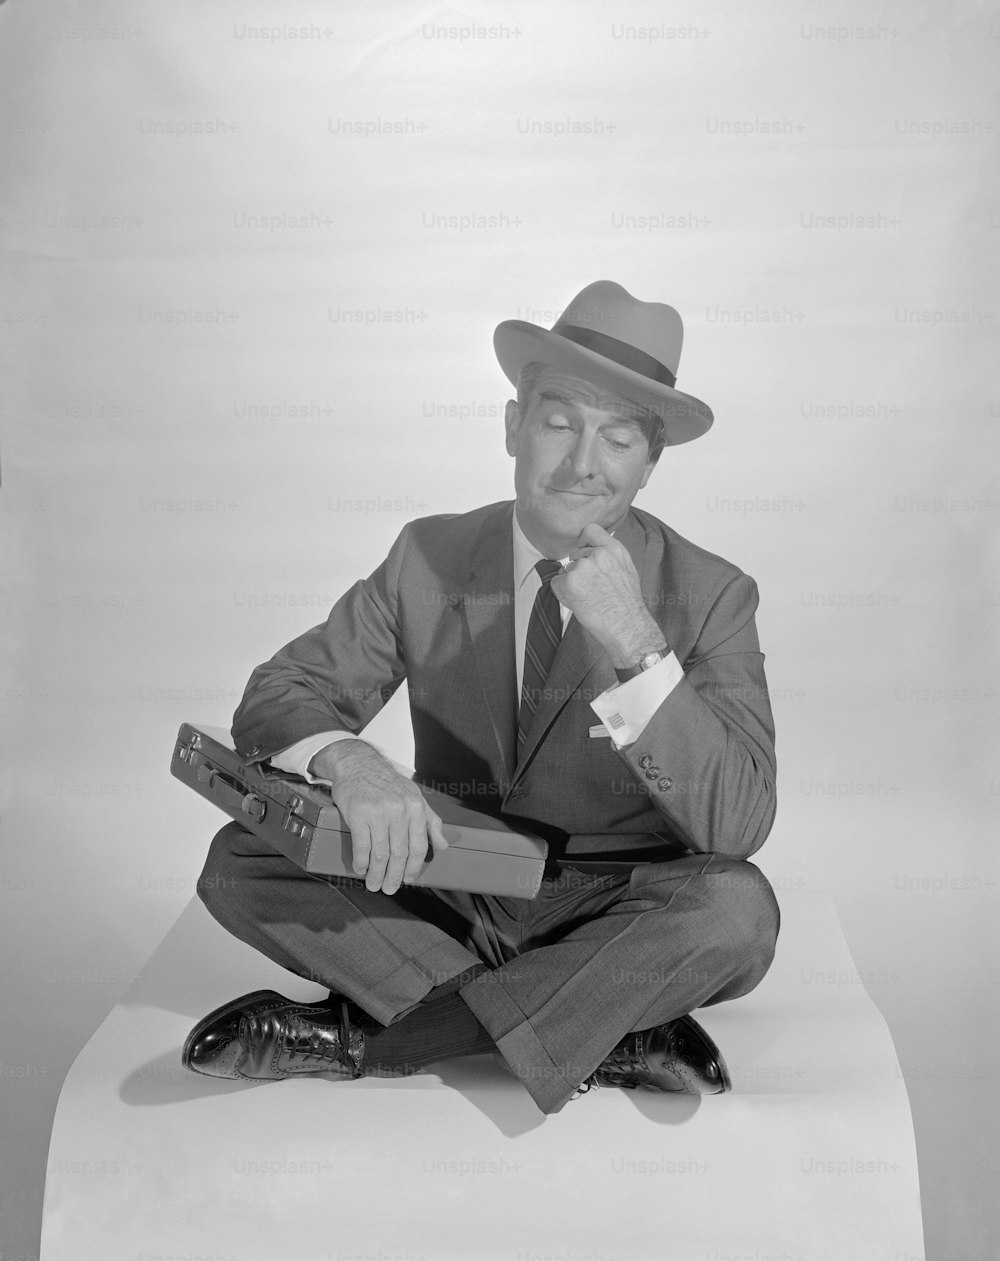 a man in a suit and hat sitting on the ground